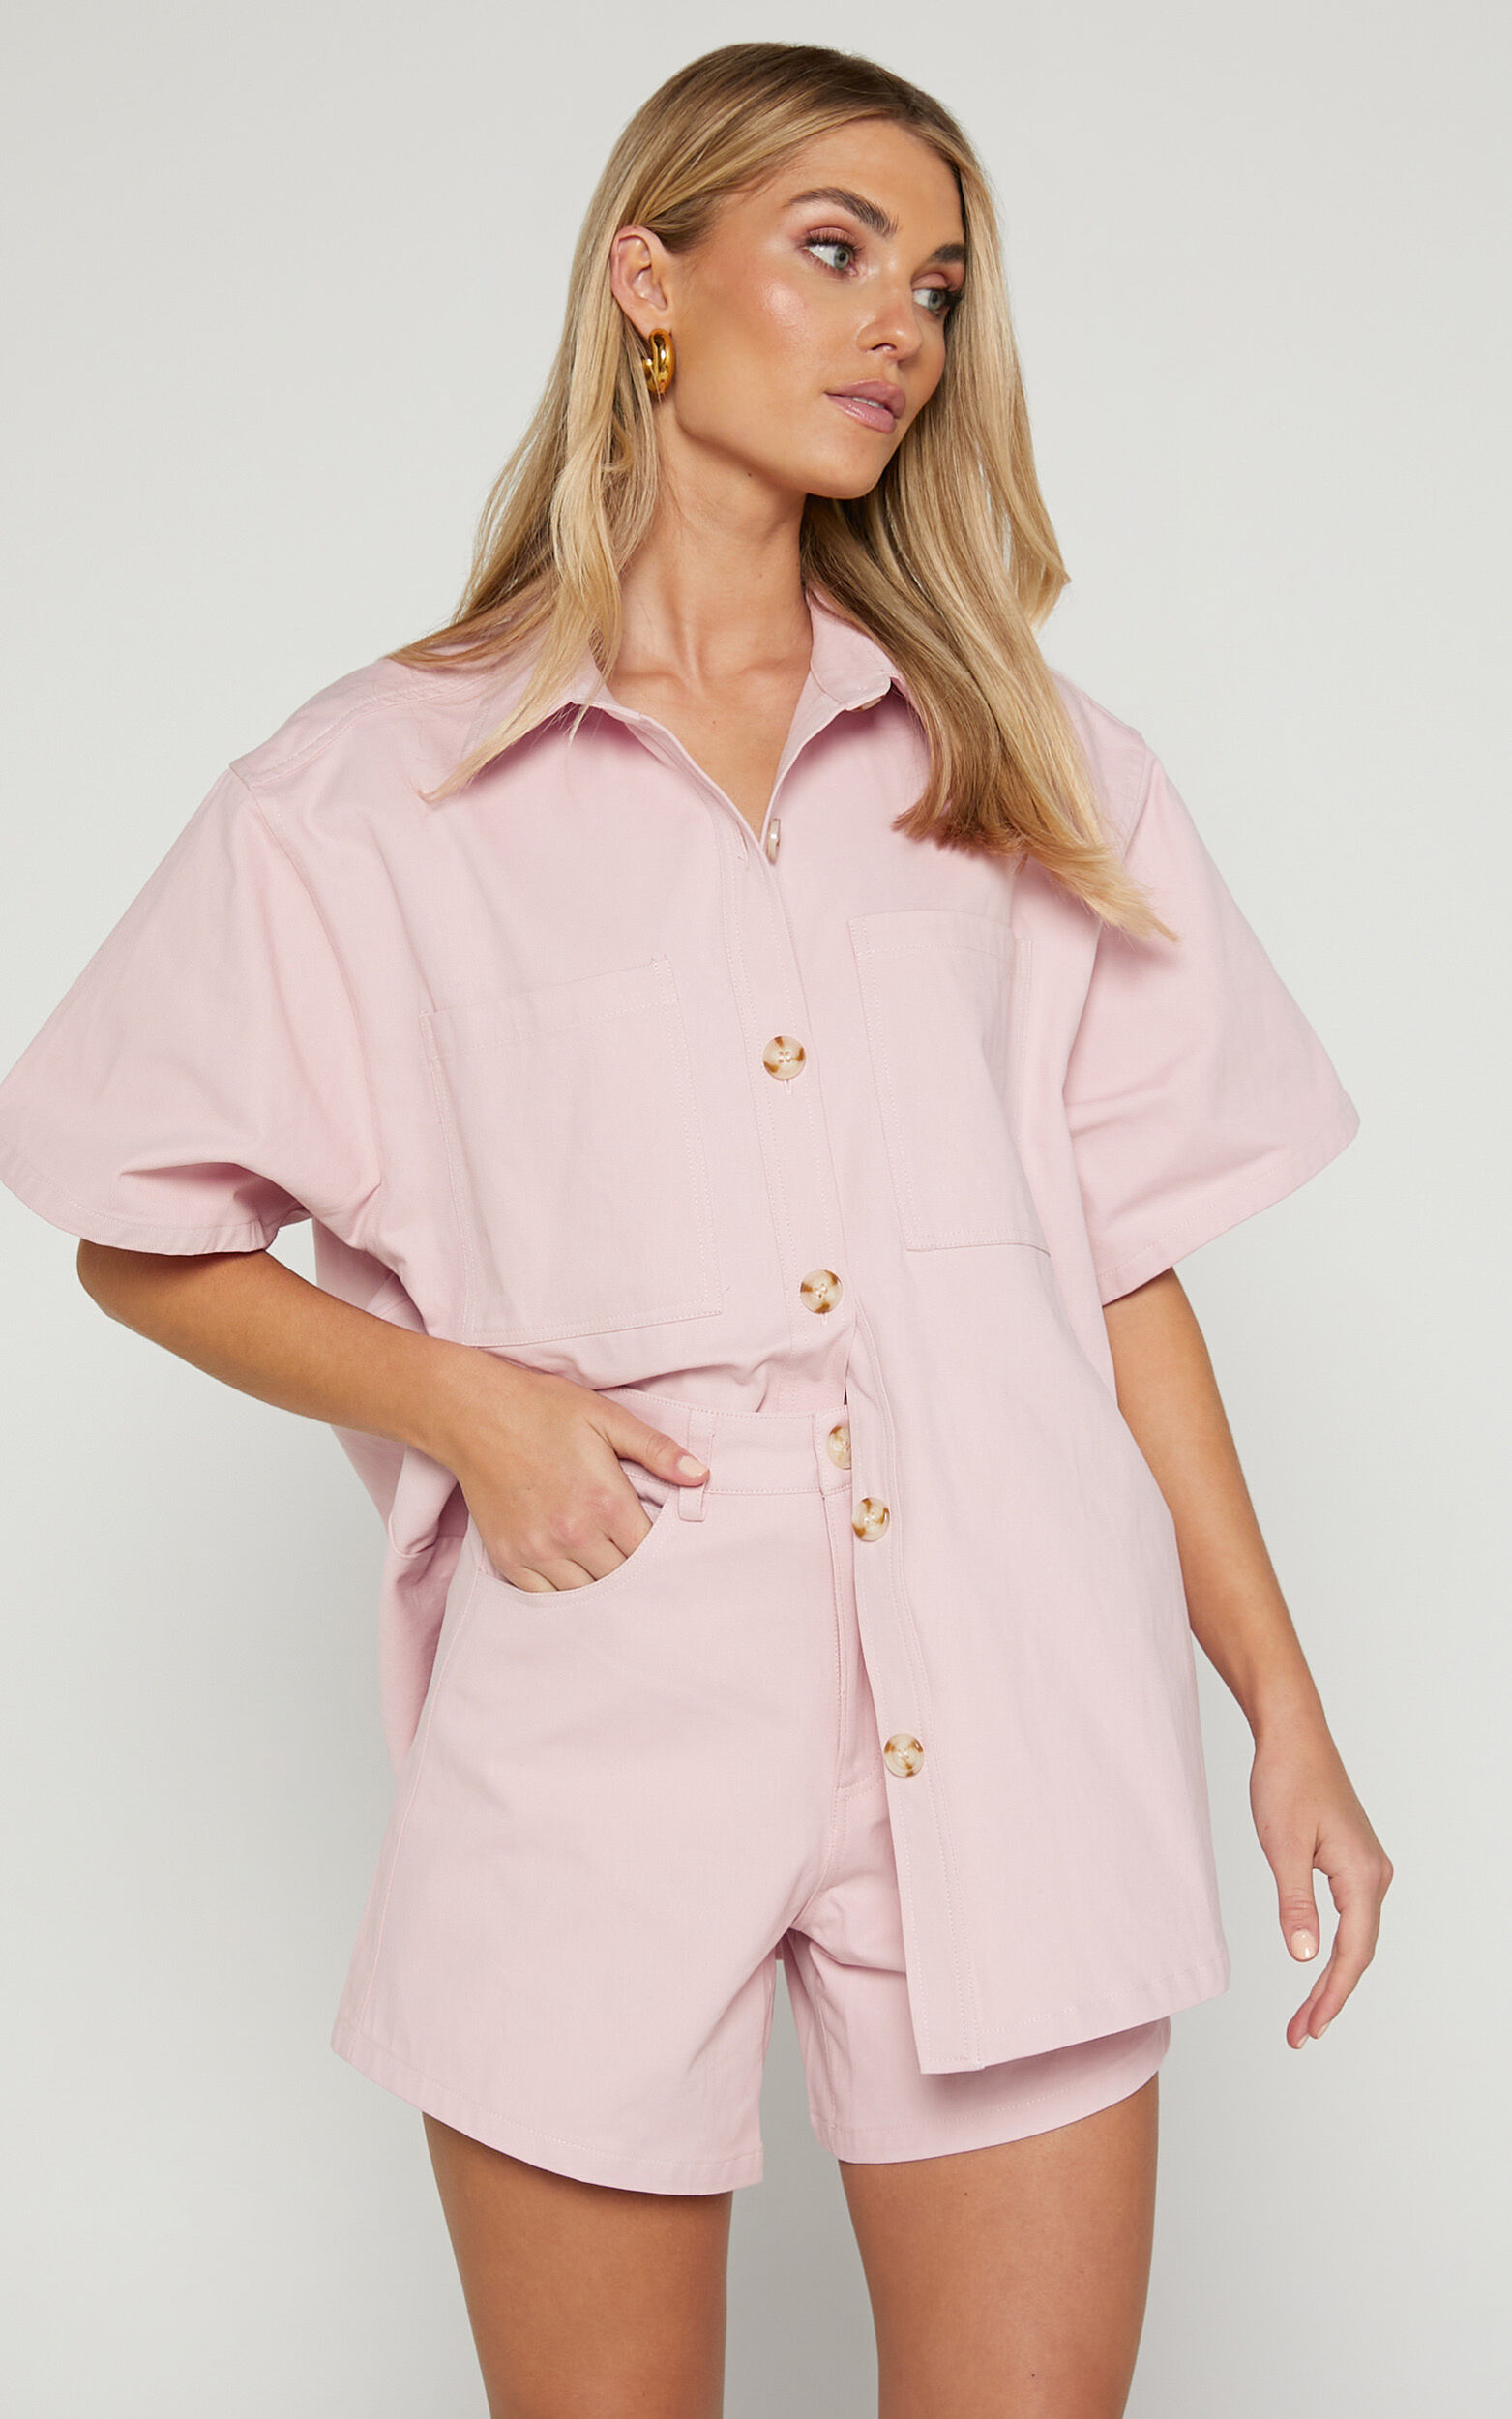 Elsa Two Piece Set - Collared Button Through Short Sleeve Shirt High Waisted Shorts in Pale Pink - 06, PNK1